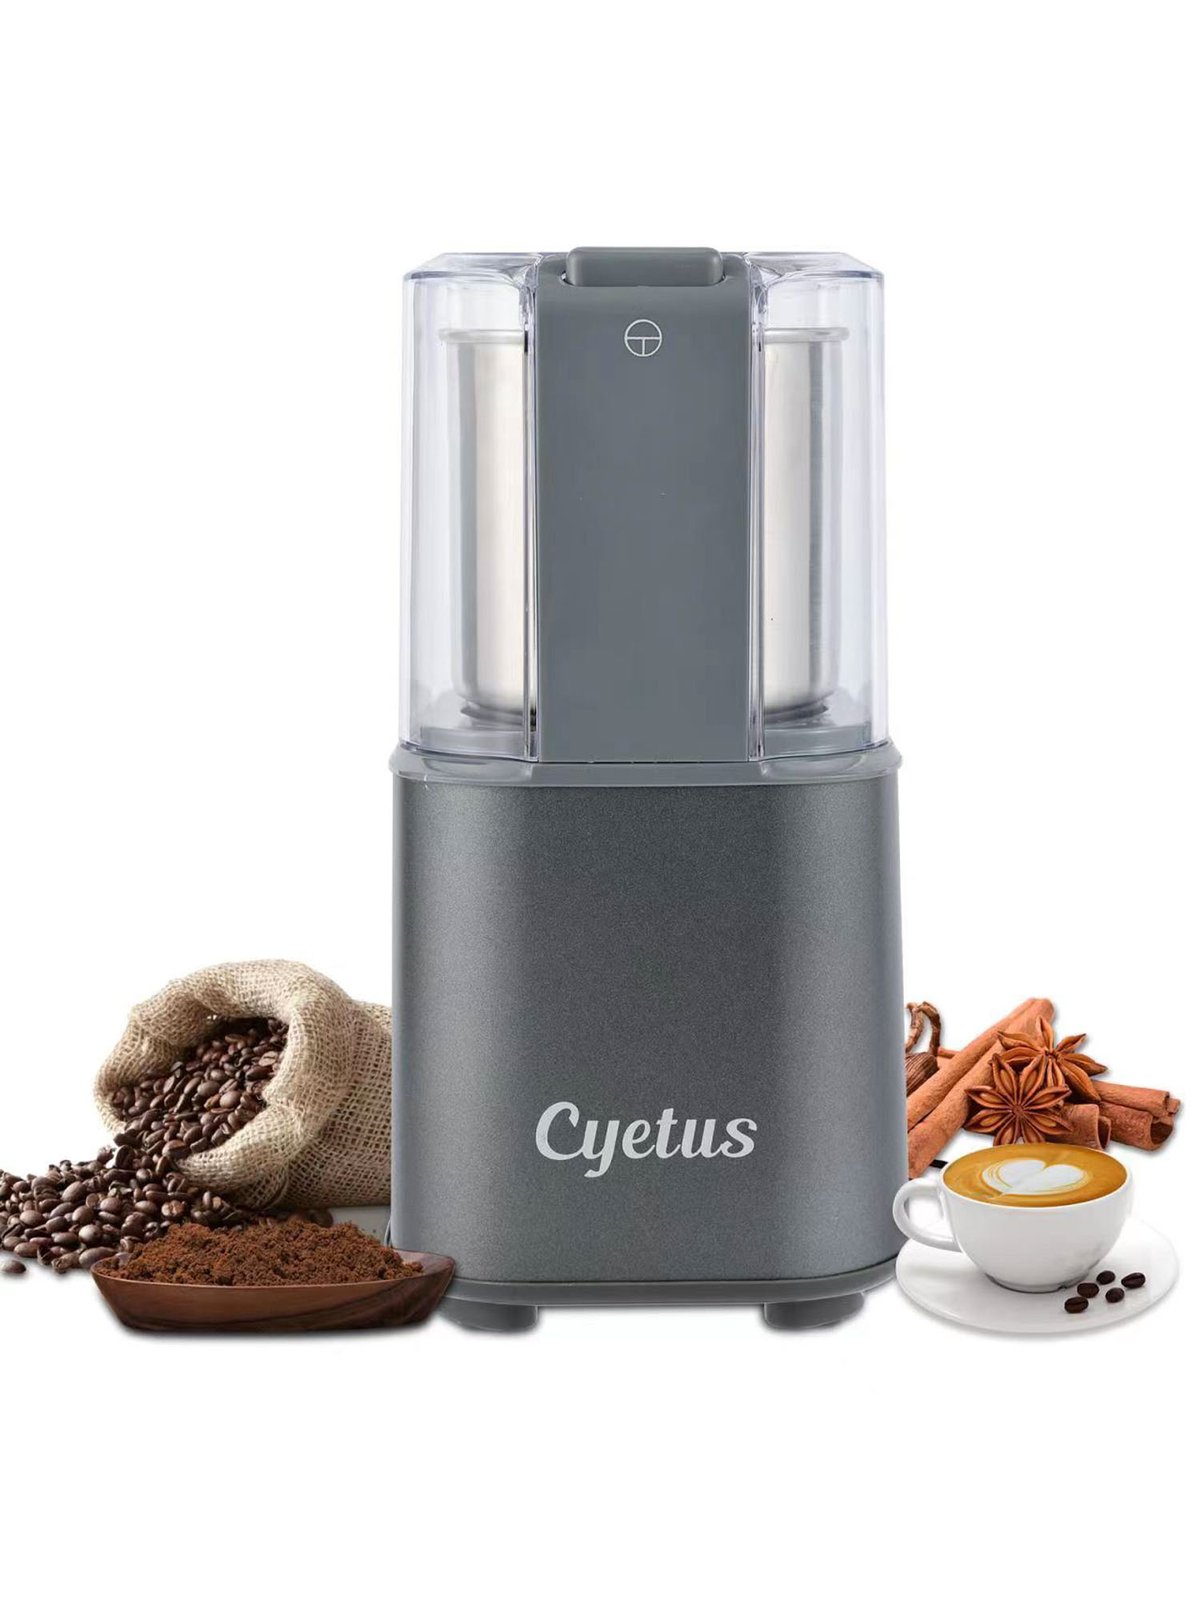 https://images.verishop.com/cyetus-black-espresso-machine-for-at-home-use-with-milk-steam-frother-wand-and-electric-coffee-bean-grinder-with-removable-stainless-steel-bowl/M00679283562651-1520699916?auto=format&cs=strip&fit=max&w=1200